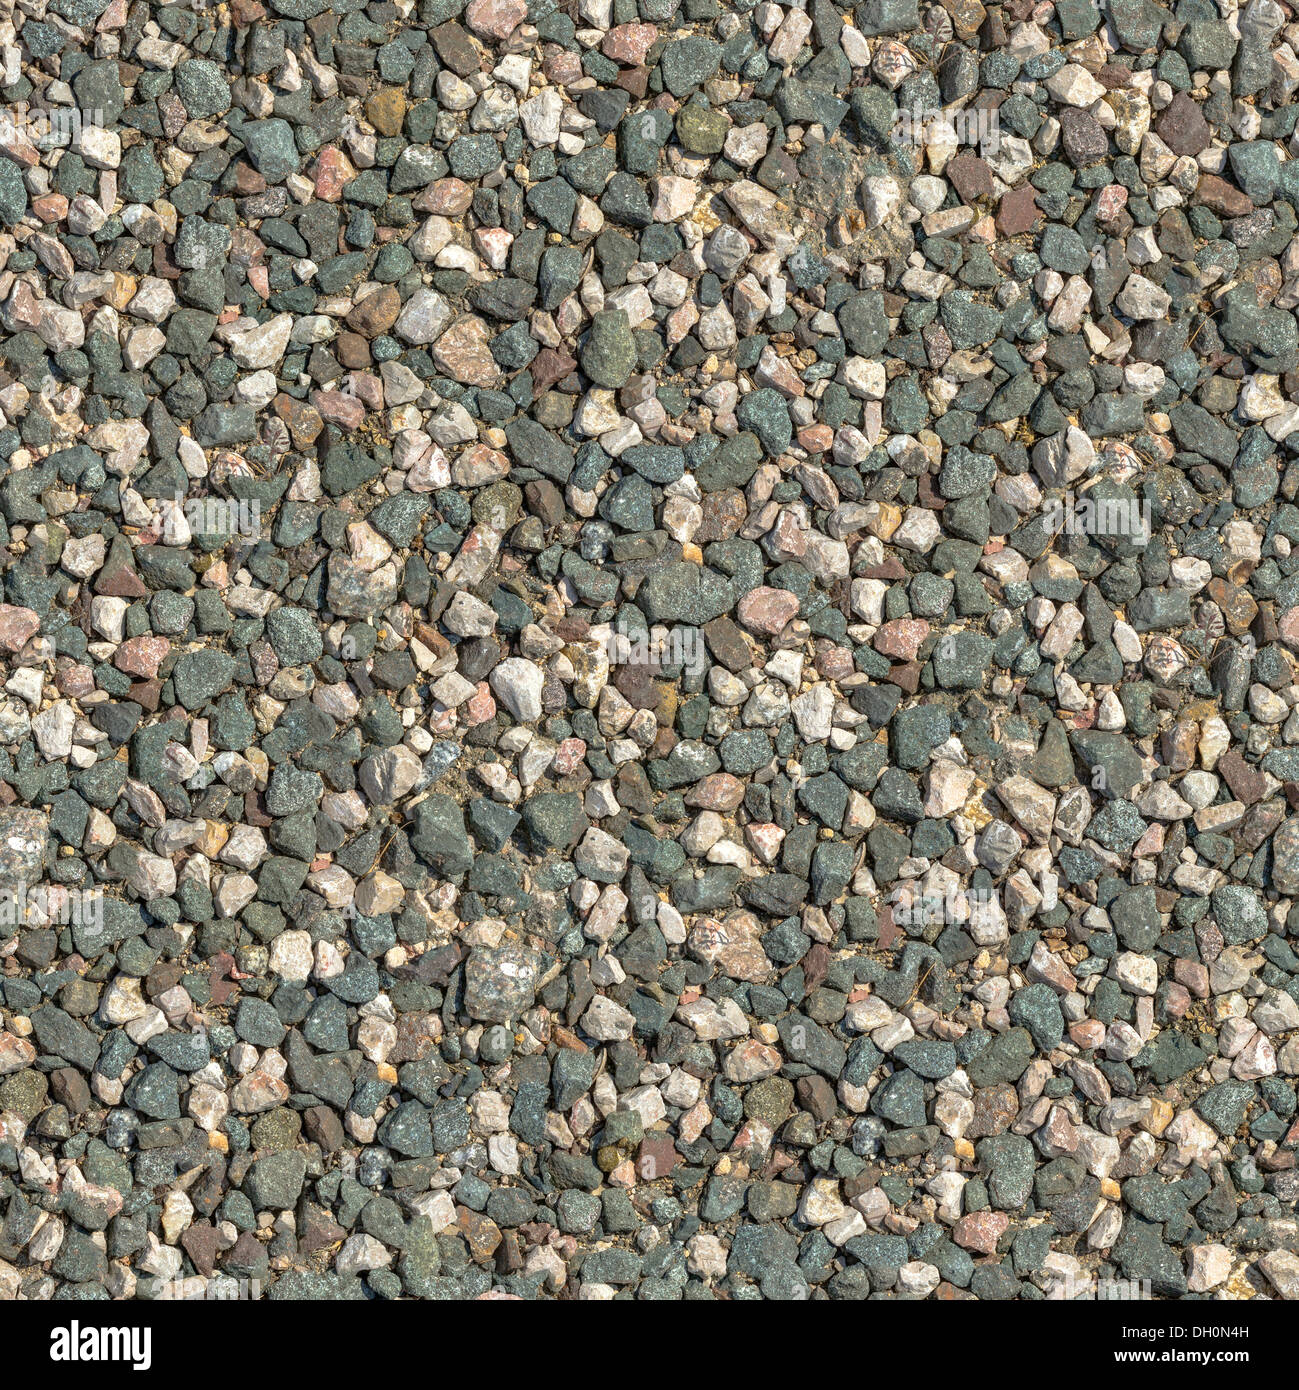 Seamless Tileable Texture of Crushed Granite. Stock Photo